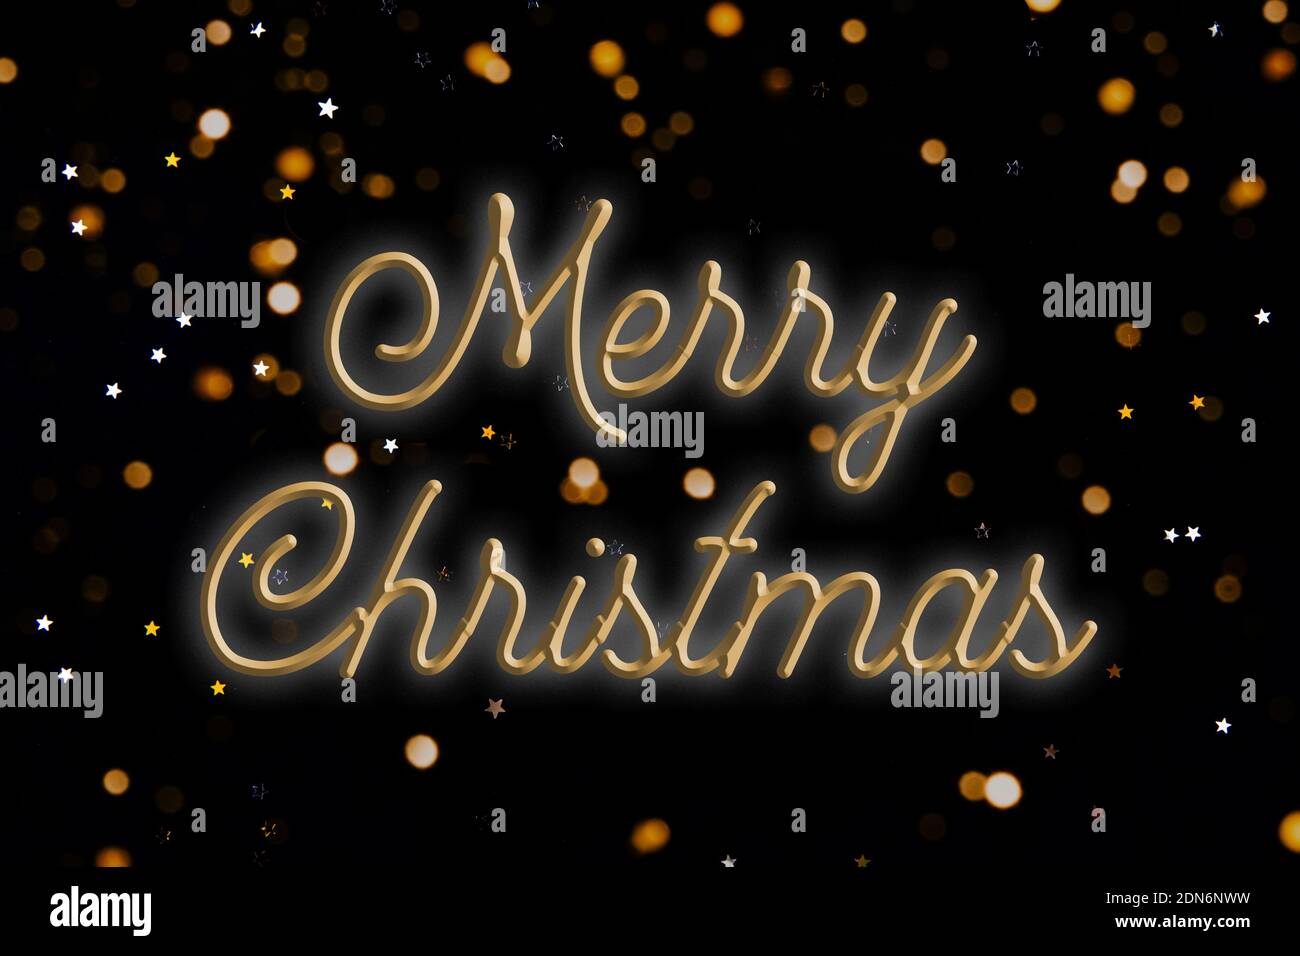 Words MERRY CHRISTMAS on a black background. Christmas greeting card with blurred bokeh lights and small stars. Stock Photo